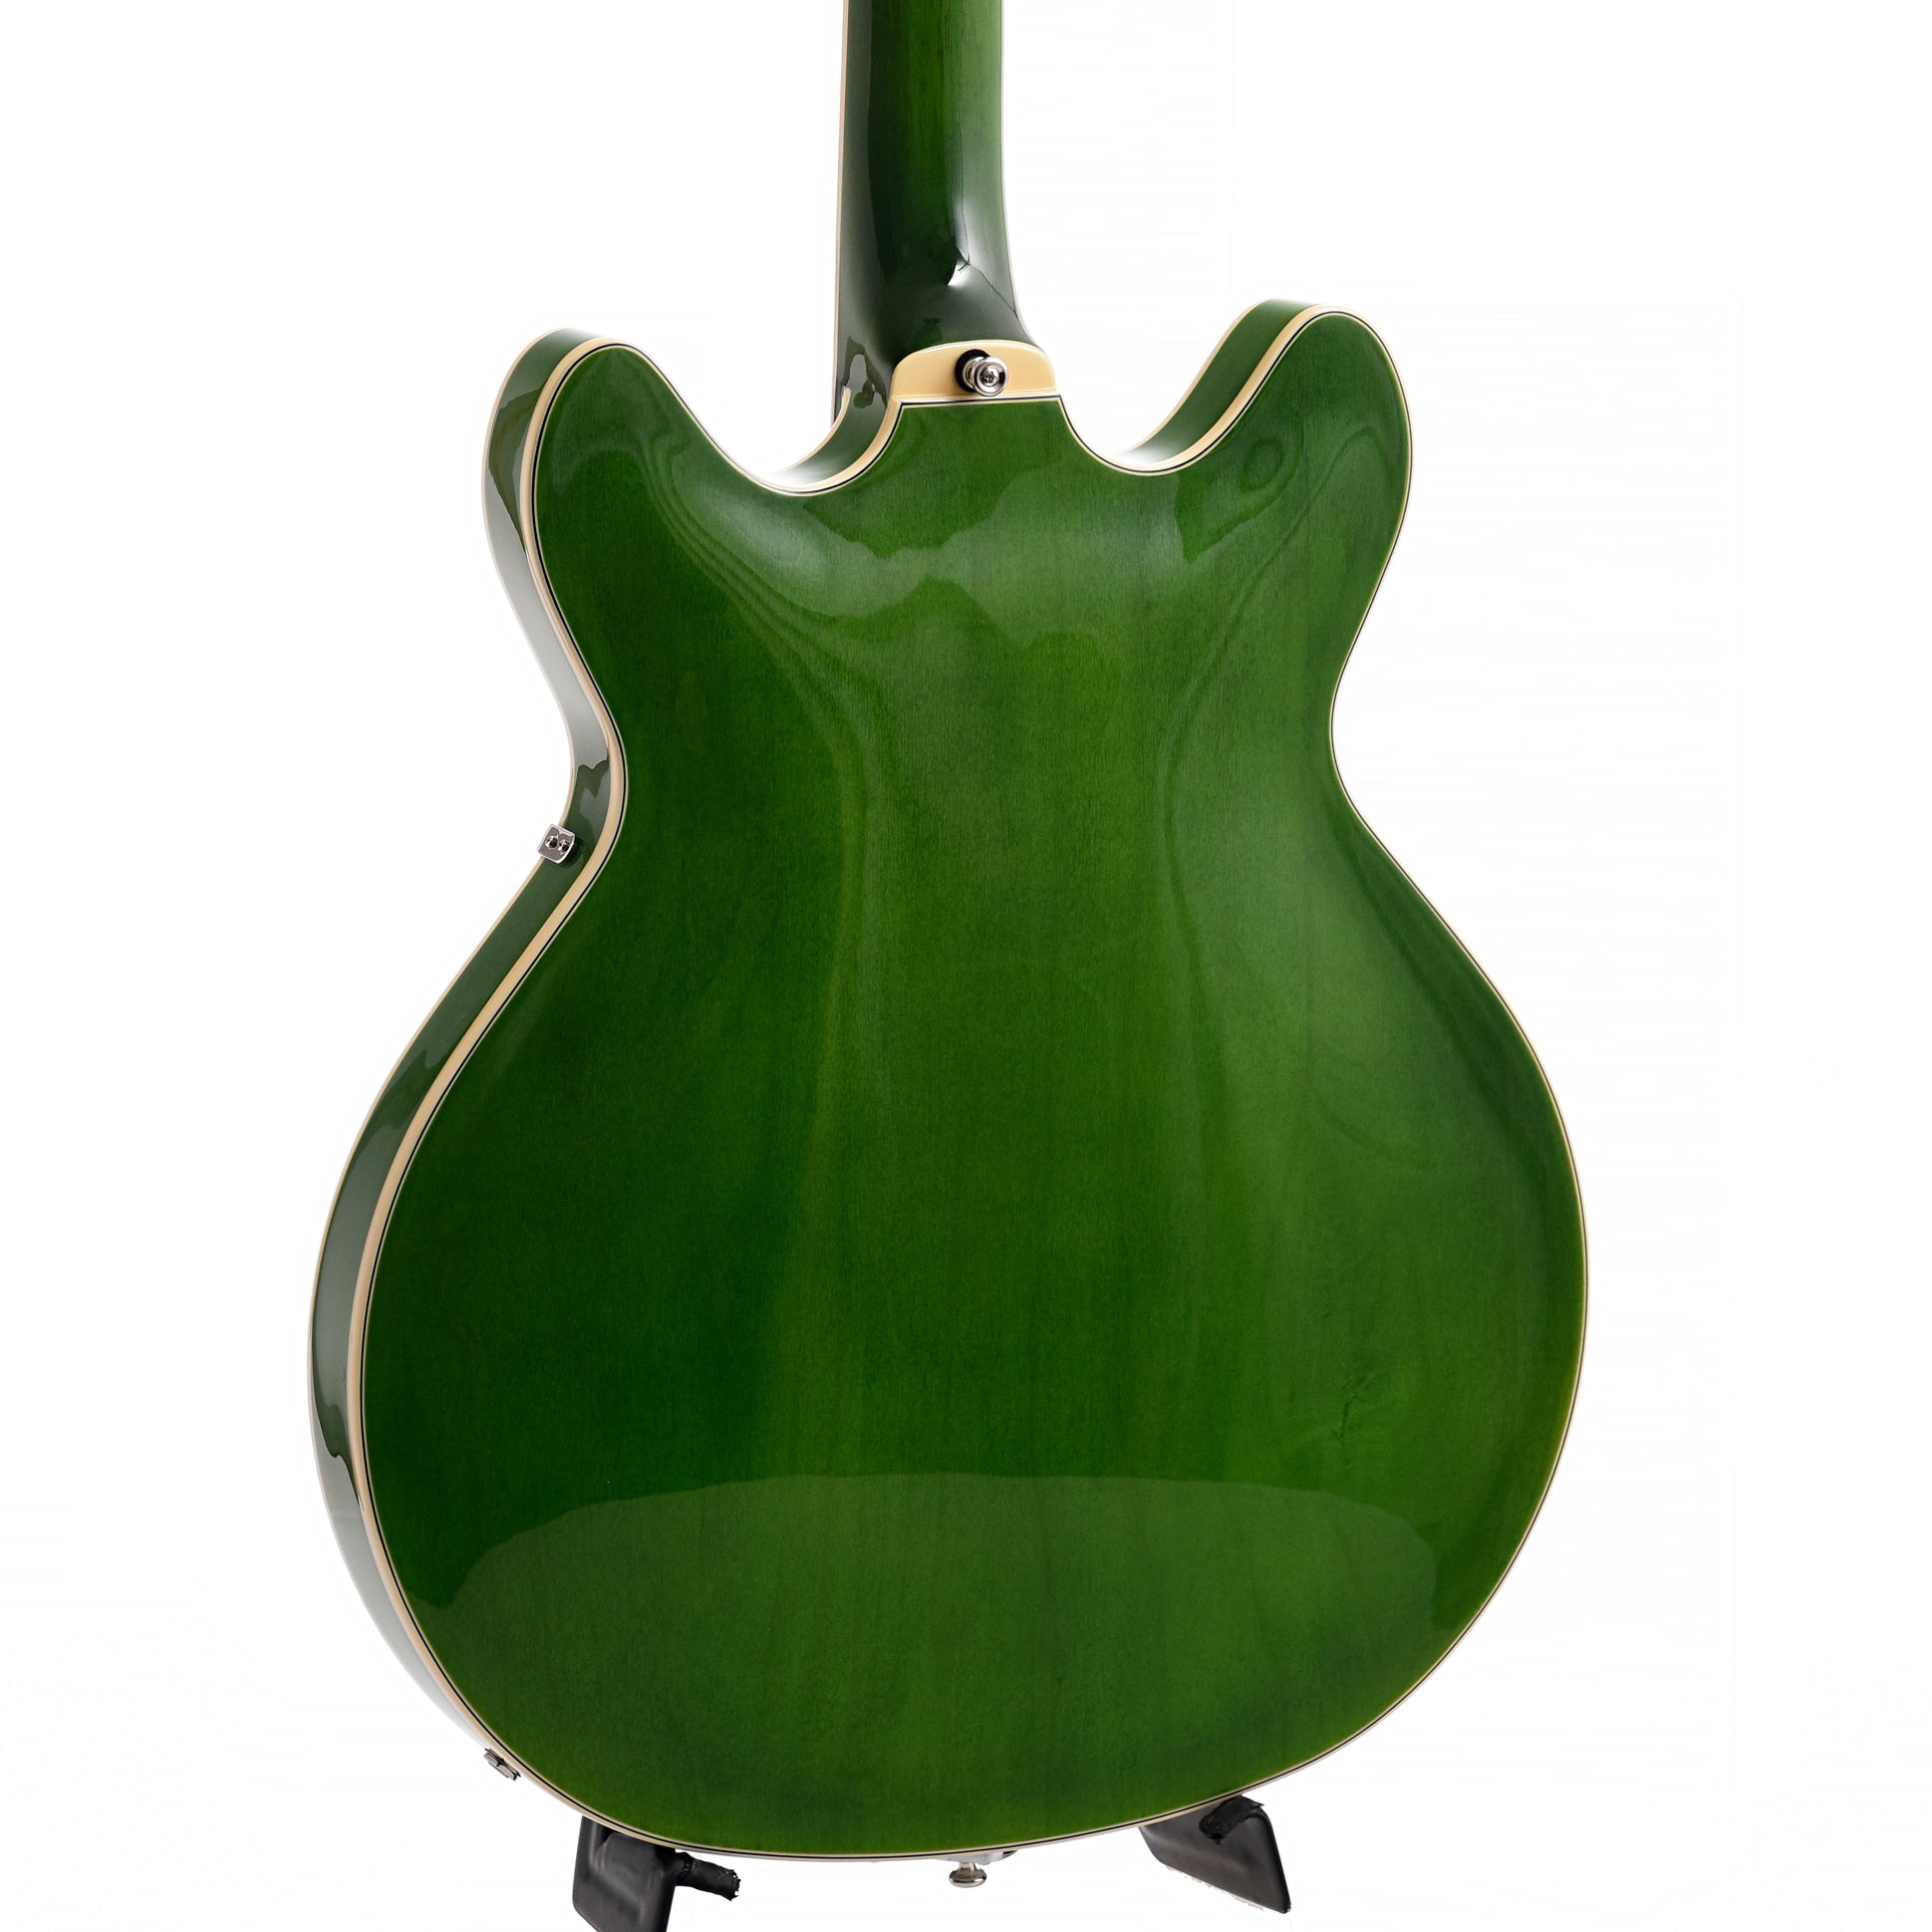 Image 9 of Guild Starfire I Double Cutaway Semi-Hollow Body Guitar with Vibrato, Emerald Green - SKU# GSF1DCV-GRN : Product Type Hollow Body Electric Guitars : Elderly Instruments